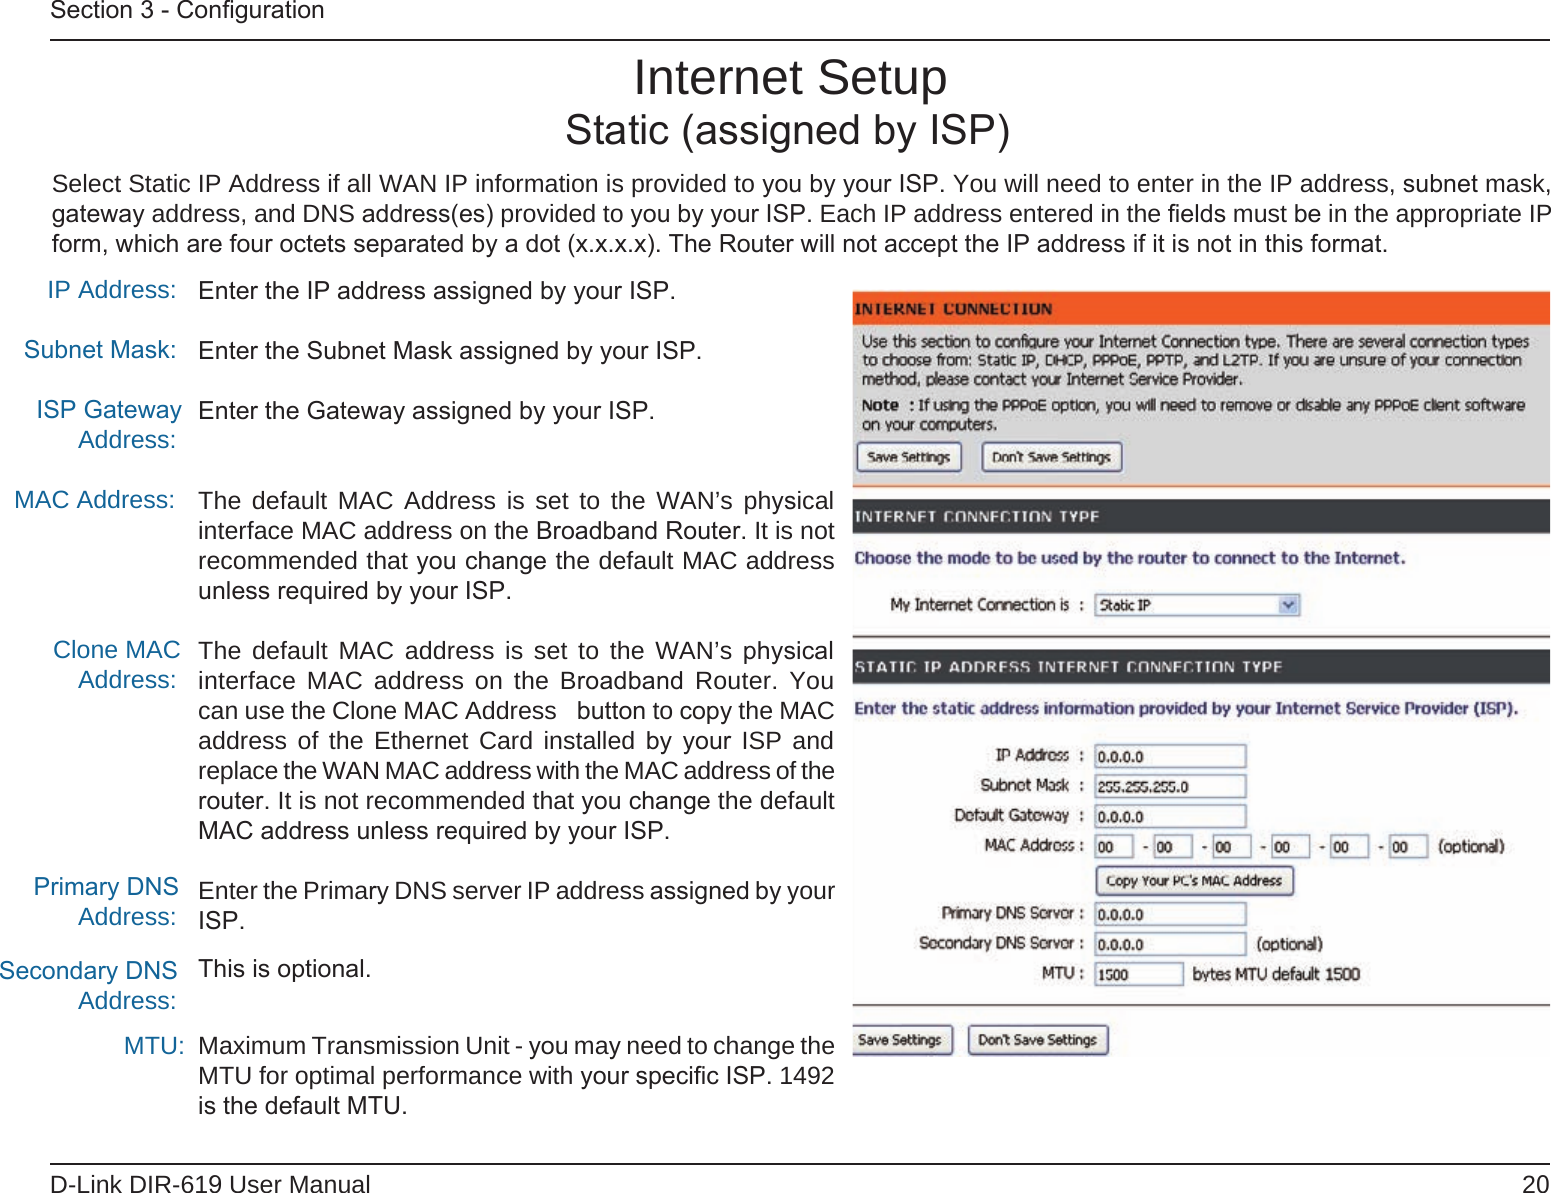 20D-Link DIR-619 User ManualSection 3 - ConﬁgurationEnter the IP address assigned by your ISP.Enter the Subnet Mask assigned by your ISP.Enter the Gateway assigned by your ISP.The default MAC Address is set to the WAN’s  physical interface MAC address on the Broadband Router. It is not recommended that you change the default MAC address unless required by your ISP.The default MAC  address is set  to the WAN’s physical interface MAC address  on the  Broadband Router. You can use the Clone MAC Address  button to copy the MAC address of the  Ethernet Card installed  by your ISP and replace the WAN MAC address with the MAC address of the router. It is not recommended that you change the default MAC address unless required by your ISP.Enter the Primary DNS server IP address assigned by your ISP.This is optional.Maximum Transmission Unit - you may need to change the MTU for optimal performance with your speciﬁc ISP. 1492 is the default MTU.IP Address:Subnet Mask:ISP Gateway Address:MAC Address:Clone MAC Address:Primary DNS Address:Secondary DNS Address:MTU:Internet SetupStatic (assigned by ISP)Select Static IP Address if all WAN IP information is provided to you by your ISP. You will need to enter in the IP address, subnet mask, gateway address, and DNS address(es) provided to you by your ISP. Each IP address entered in the ﬁelds must be in the appropriate IP form, which are four octets separated by a dot (x.x.x.x). The Router will not accept the IP address if it is not in this format.